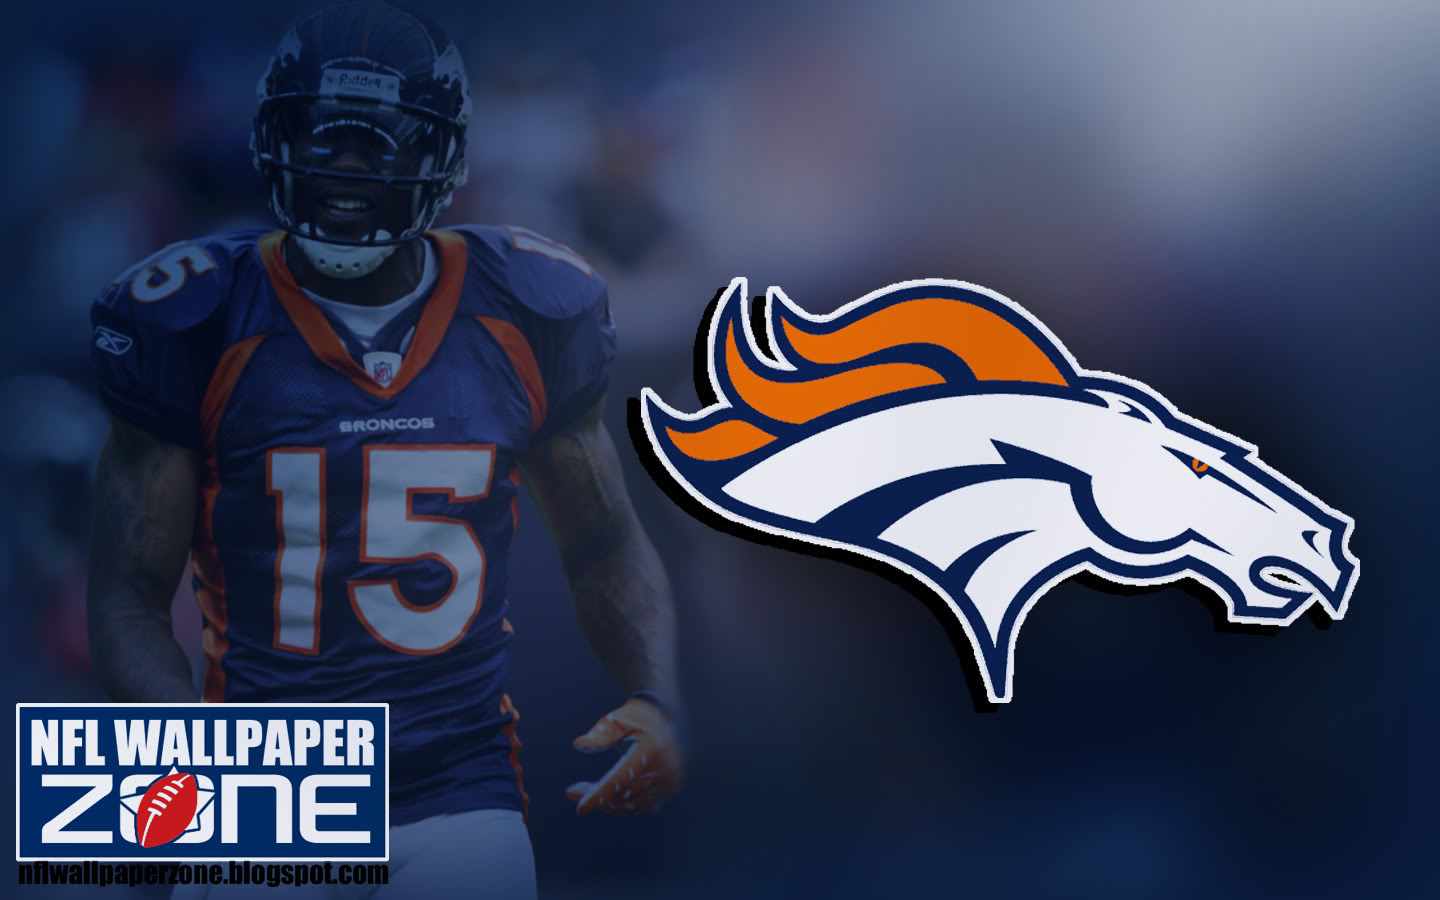 Hope you like this Denver Broncos wallpaper HD background as much as